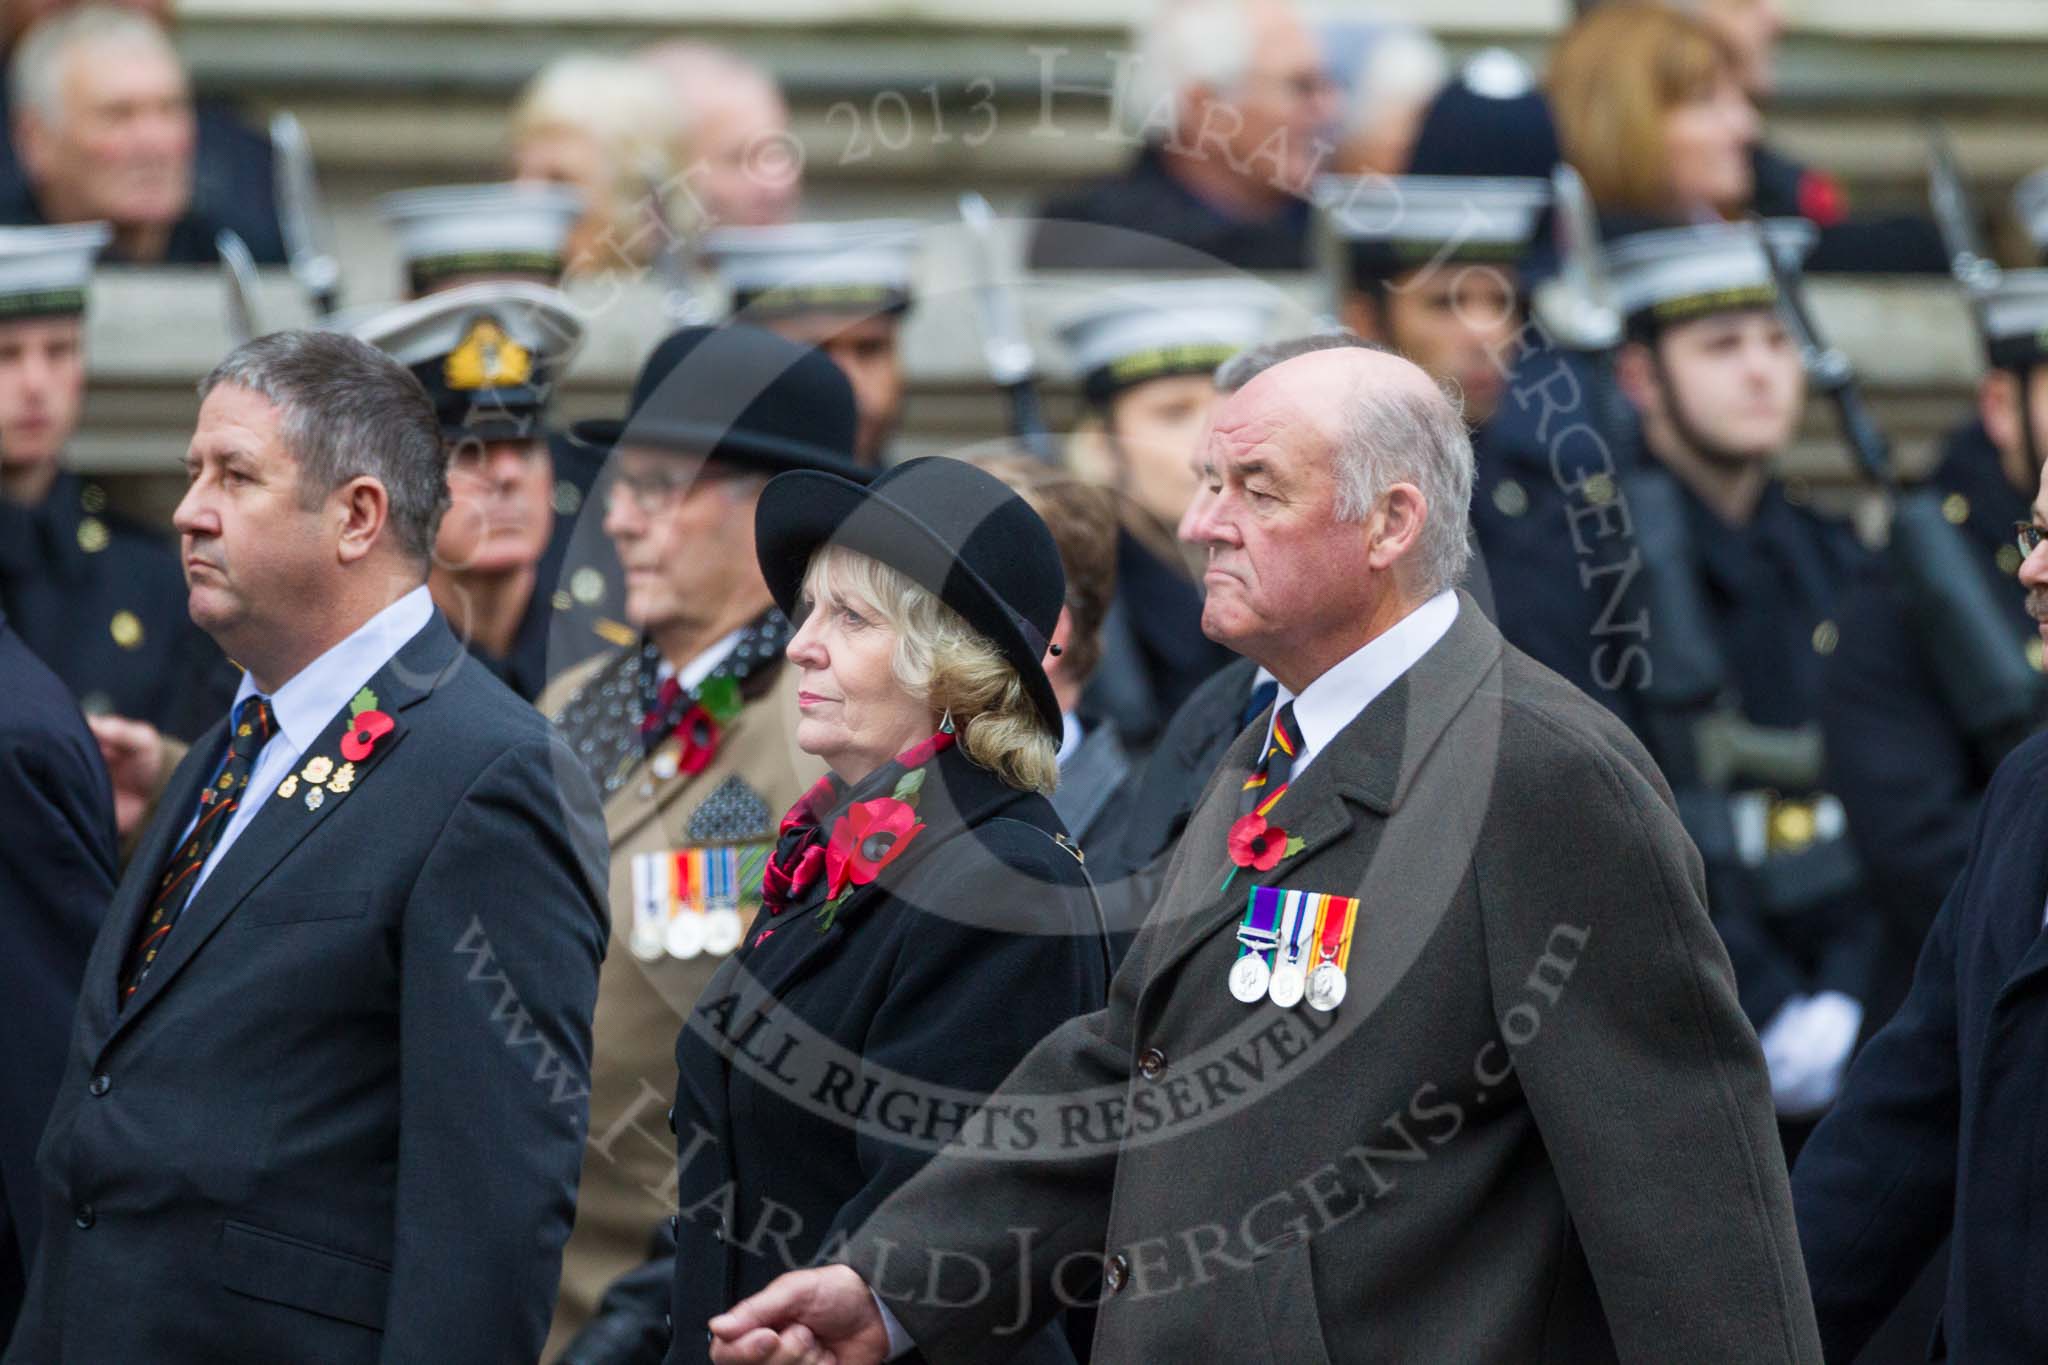 Remembrance Sunday at the Cenotaph 2015: Group M18, The Firefighters Memorial Trust.
Cenotaph, Whitehall, London SW1,
London,
Greater London,
United Kingdom,
on 08 November 2015 at 12:16, image #1522